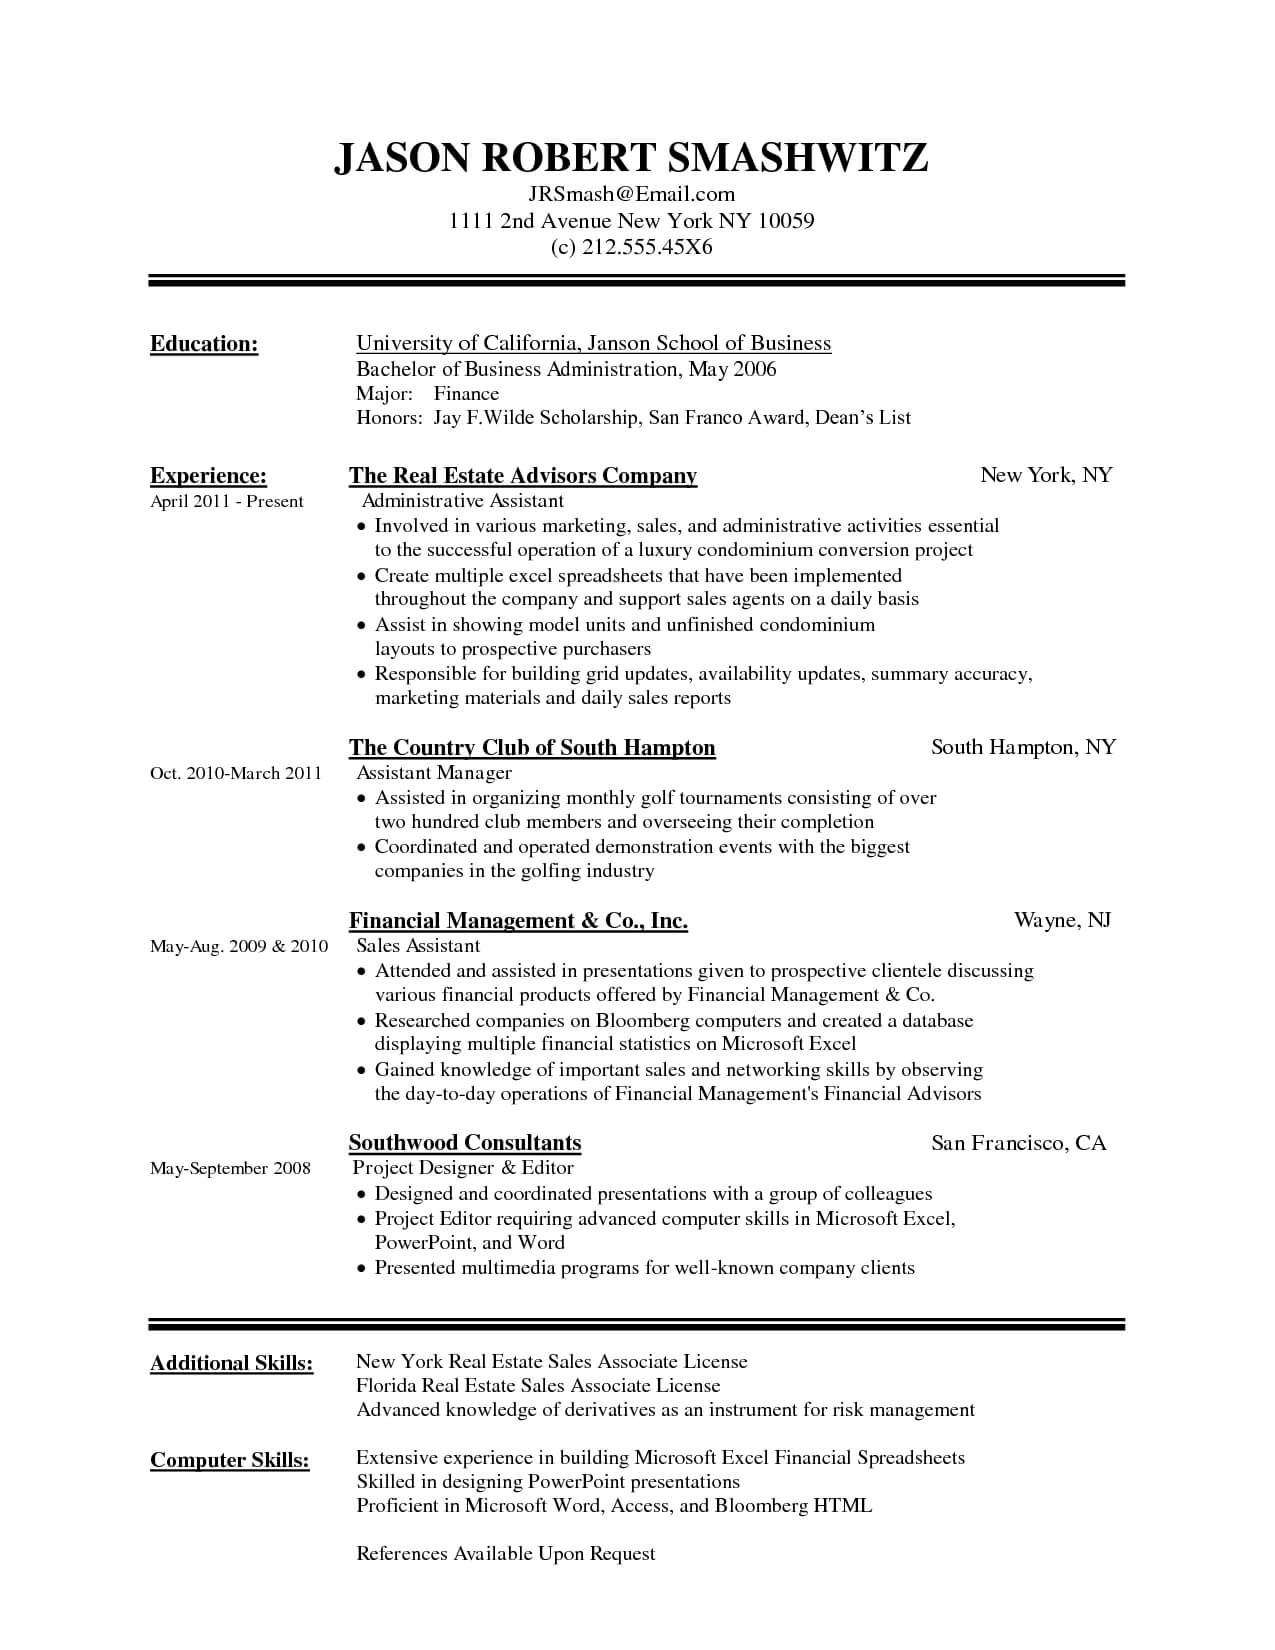 Resume Template Microsoft Word 2013 Resume Template Within Resume Templates Word 2013